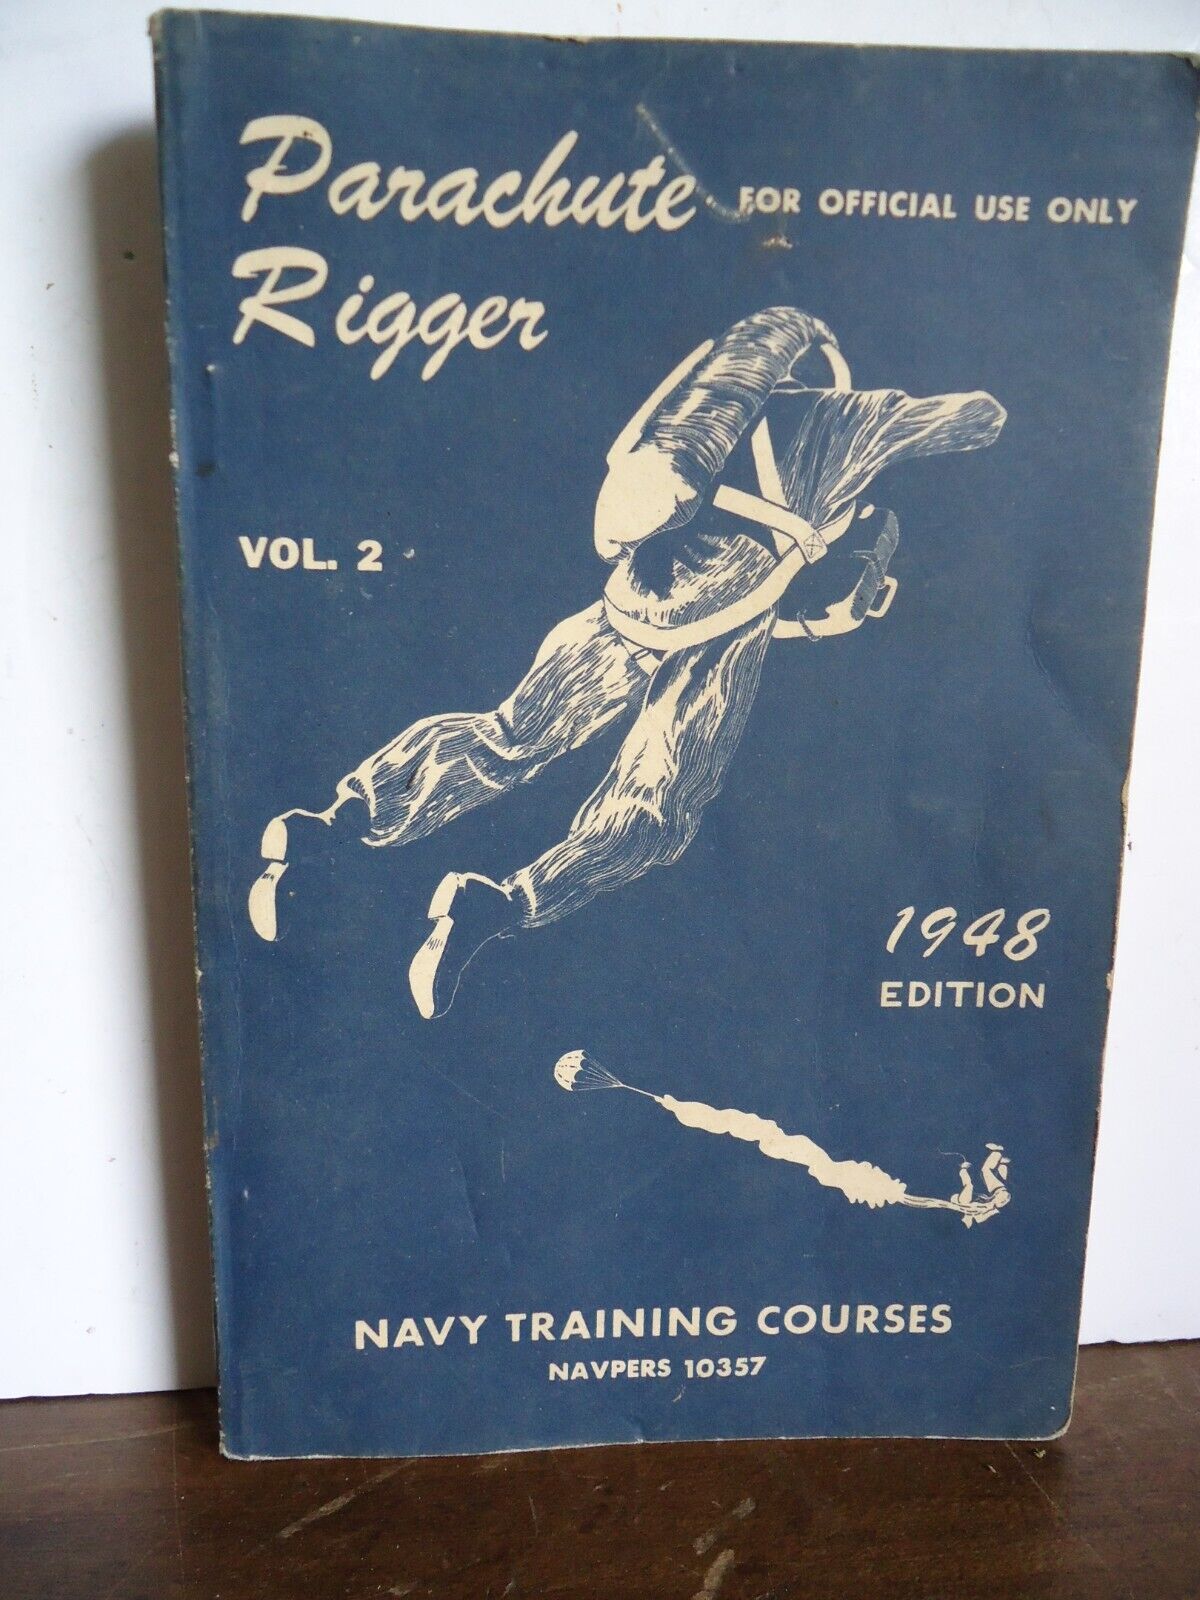 1948 PARACHUTE RIGGER VOLUME 2- US NAVY TRAINING COURSE - NAVPERS 10357 - RARE